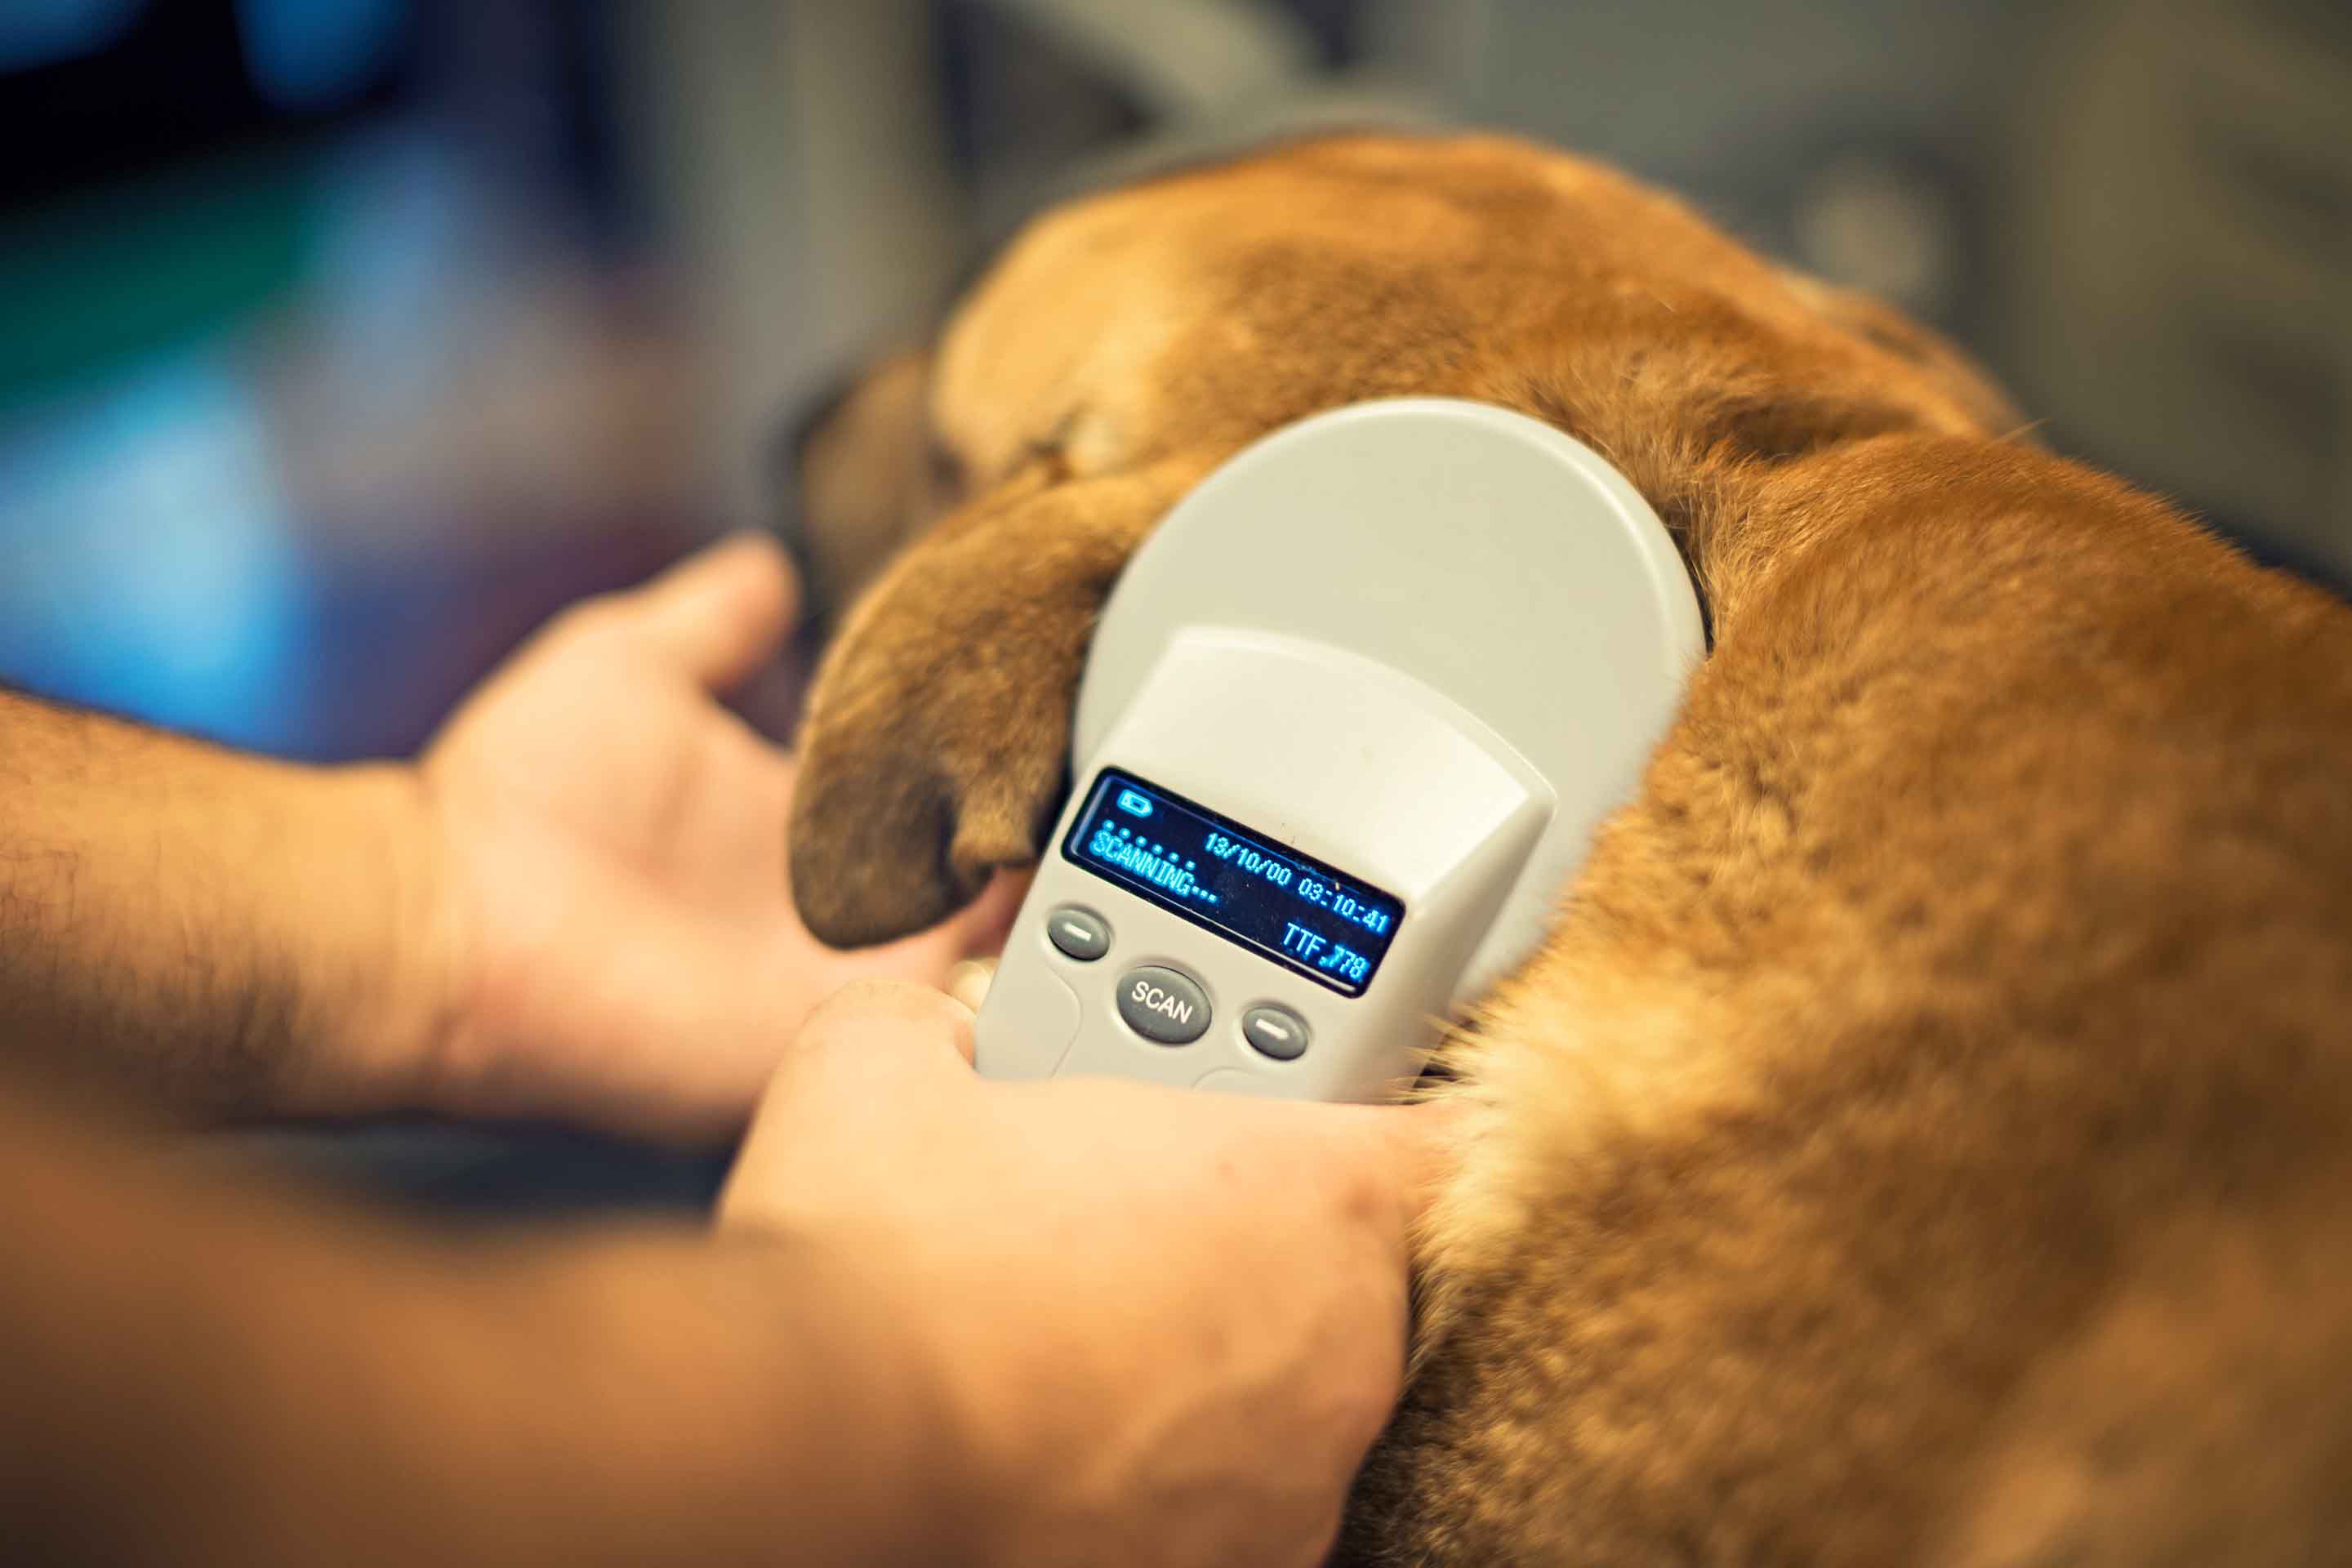 Cost to Microchip a Dog